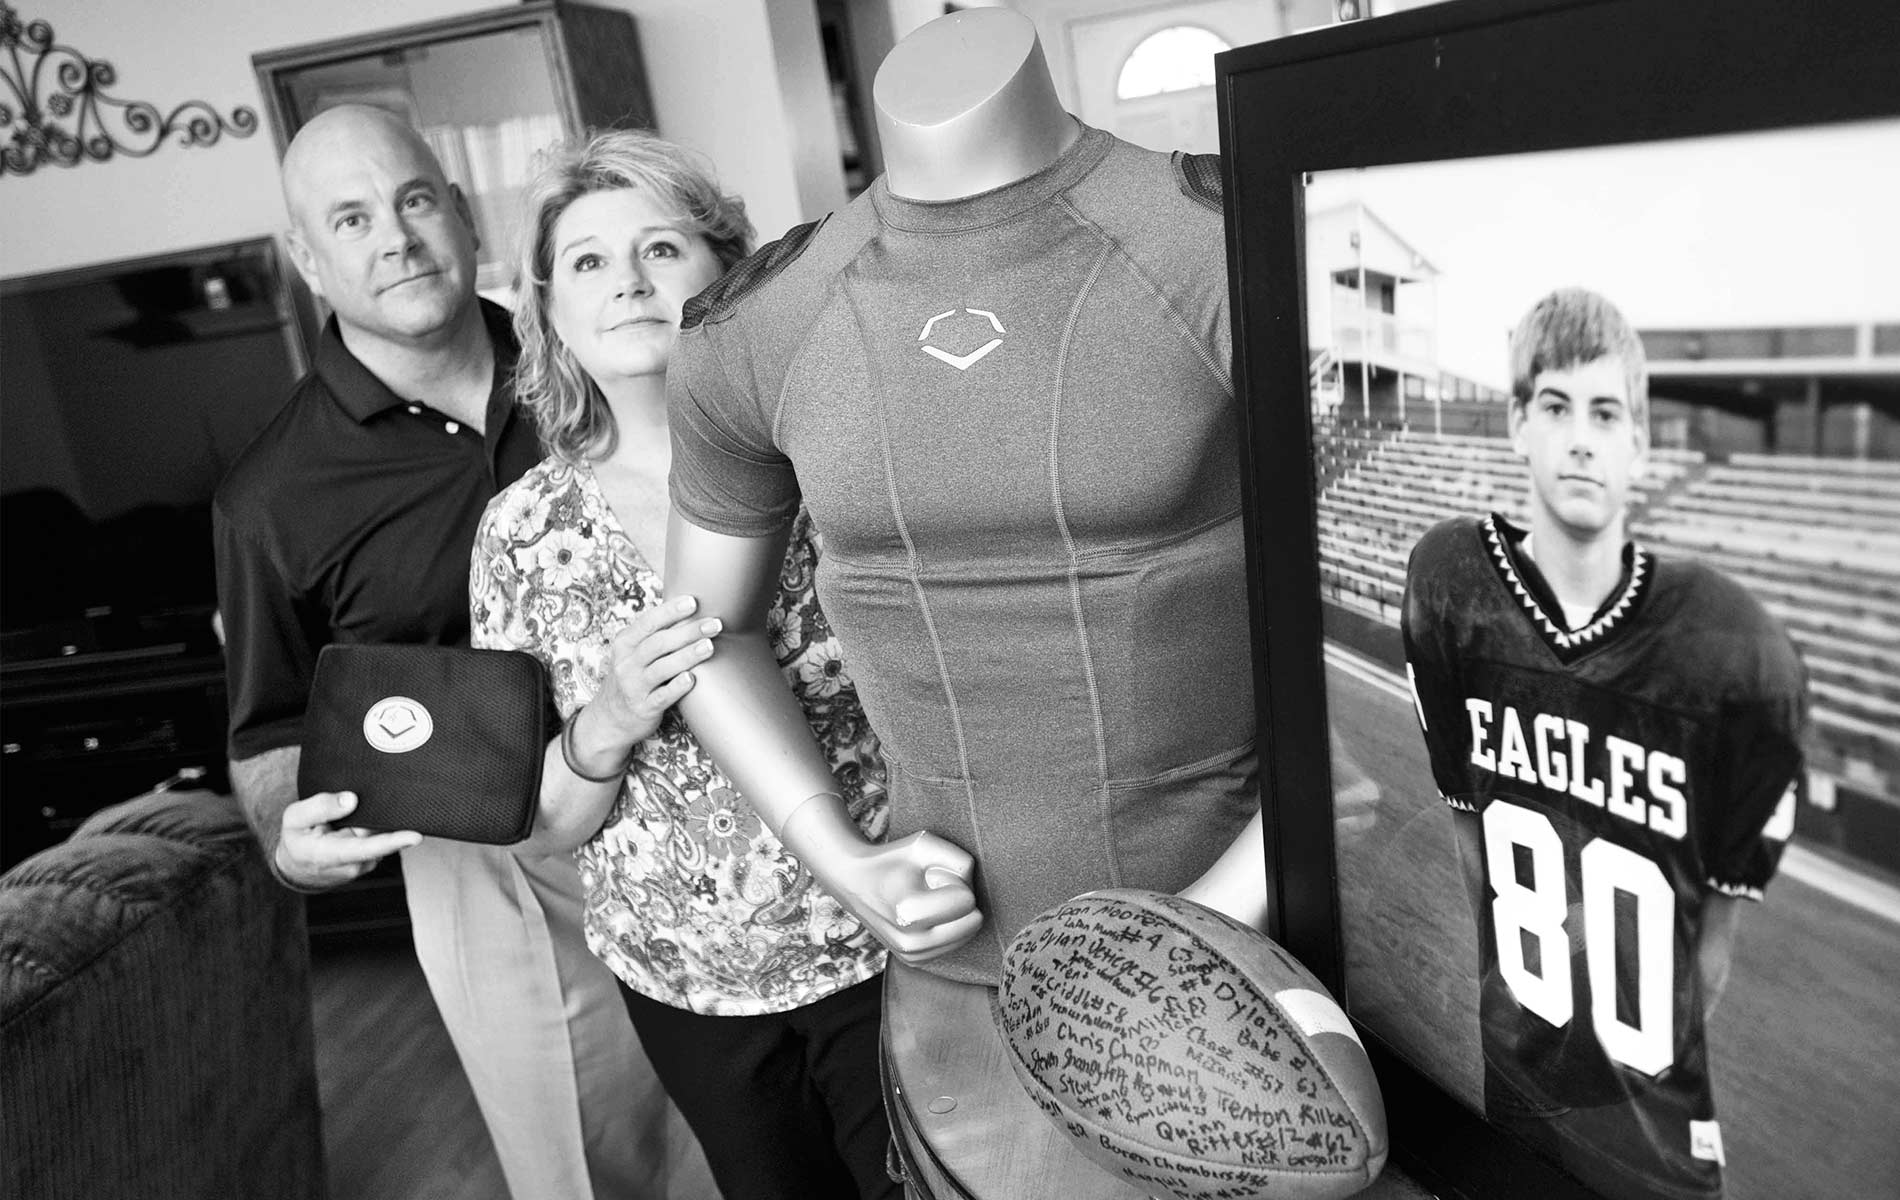 Brian and Kathy Haugen display the rib-protecting shirt that could have saved their son’s life. Now they dedicate funds from the Taylor Haugen Foundation to equipping young athletes with this and other protective gear. | Photo courtesy of Taylor Haugen Foundation